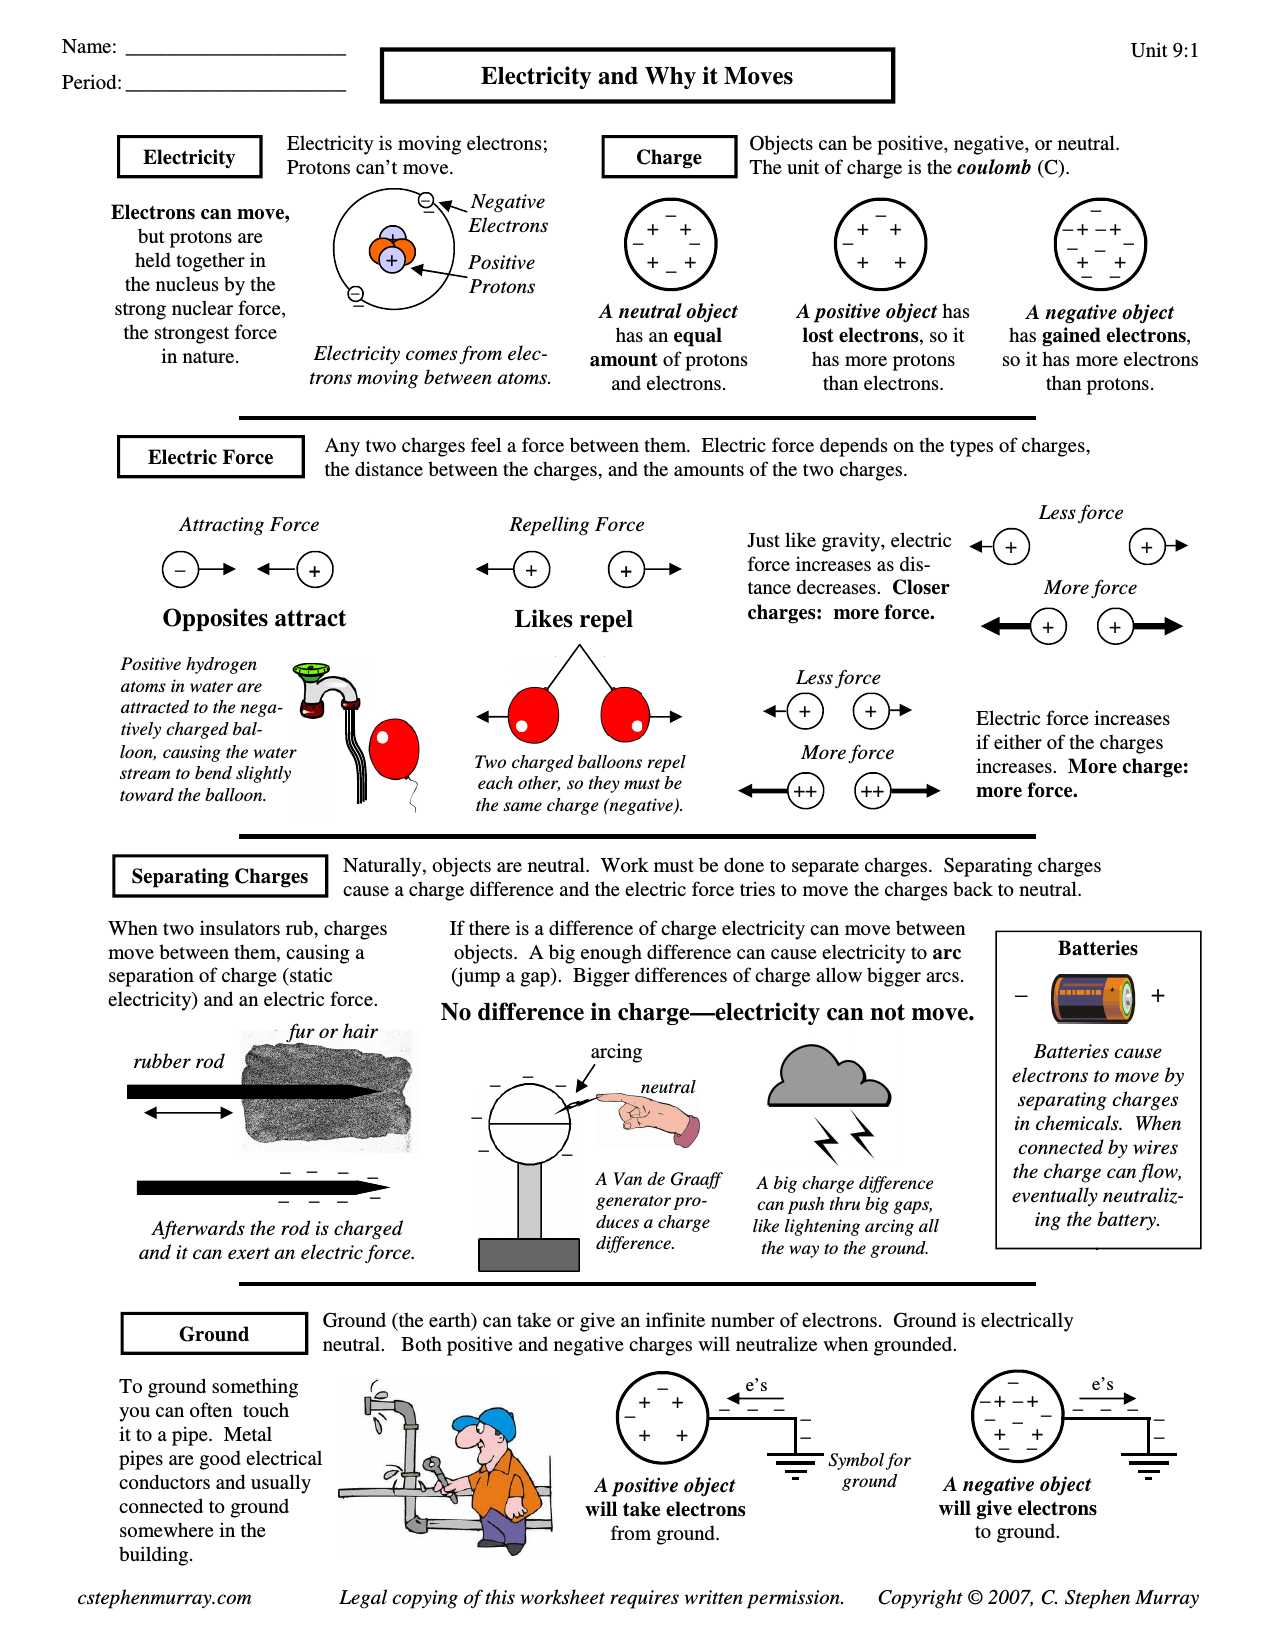 Bill Nye Simple Machines Worksheet or Bill Nye the Science Guy Electricity Worksheet Answers